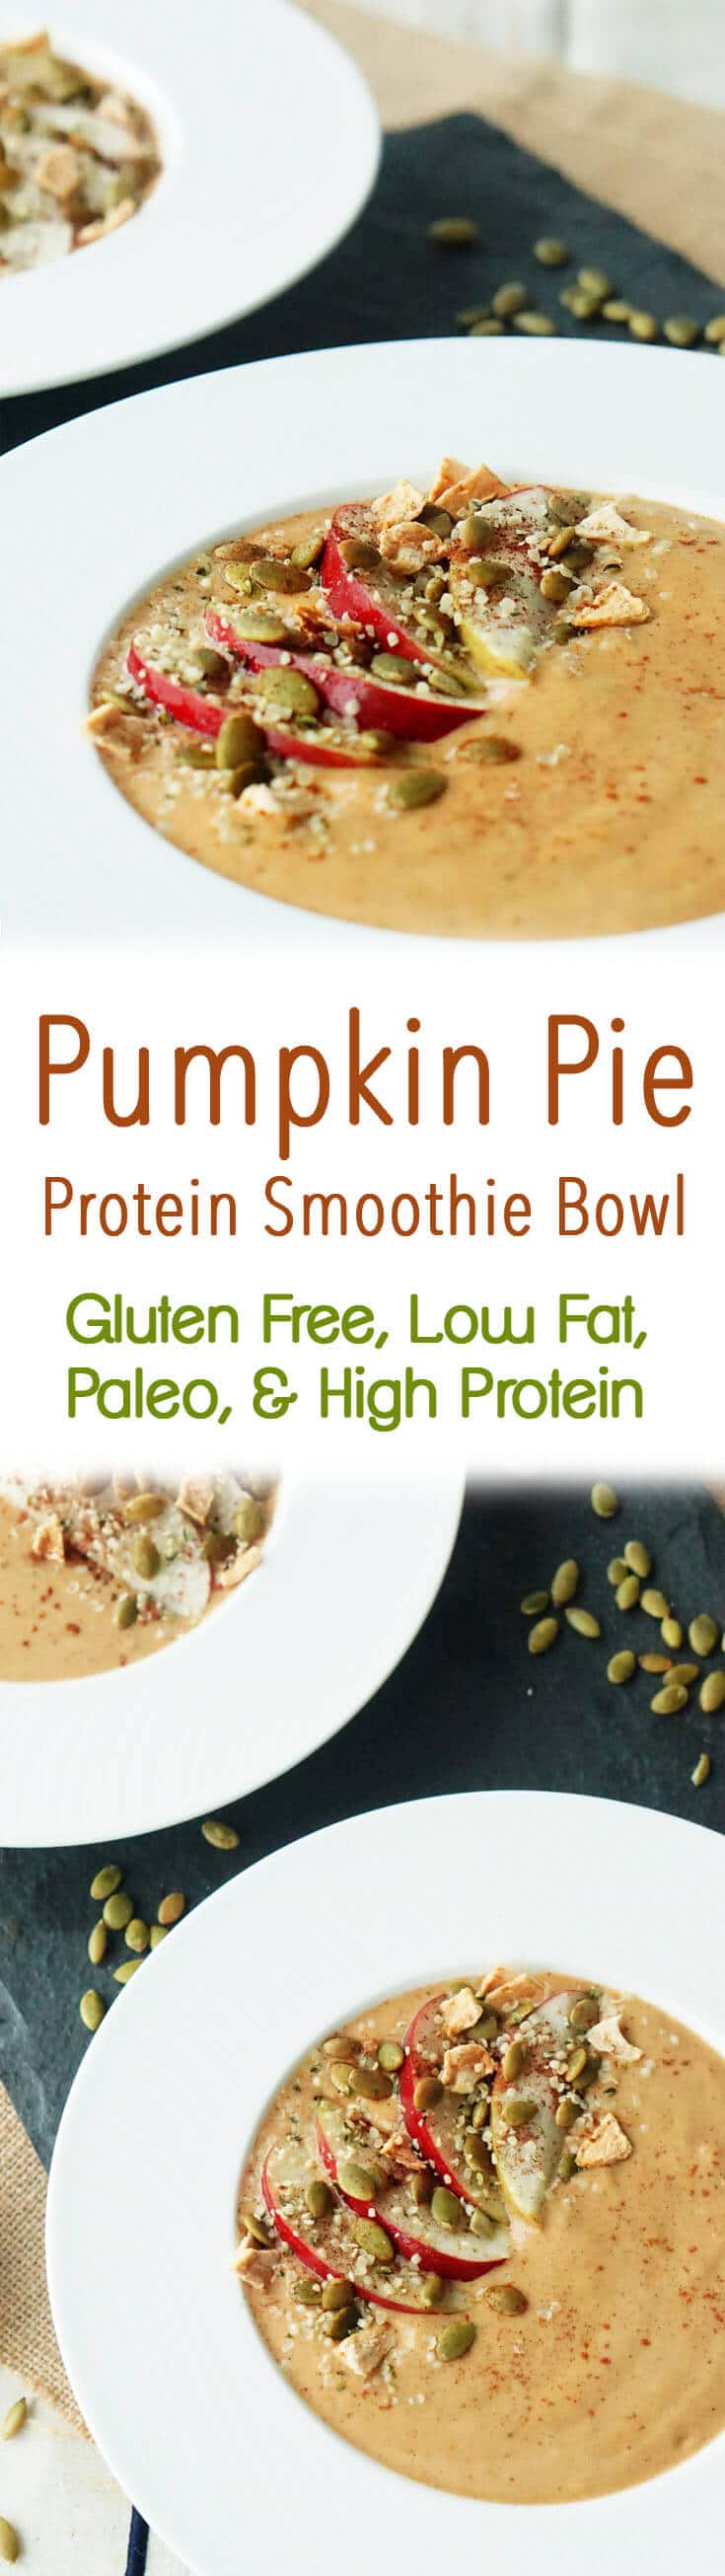 This pumpkin pie smoothie bowl is packed with protein from protein powder, canned pumpkin, apples, pumpkin seeds and more! 